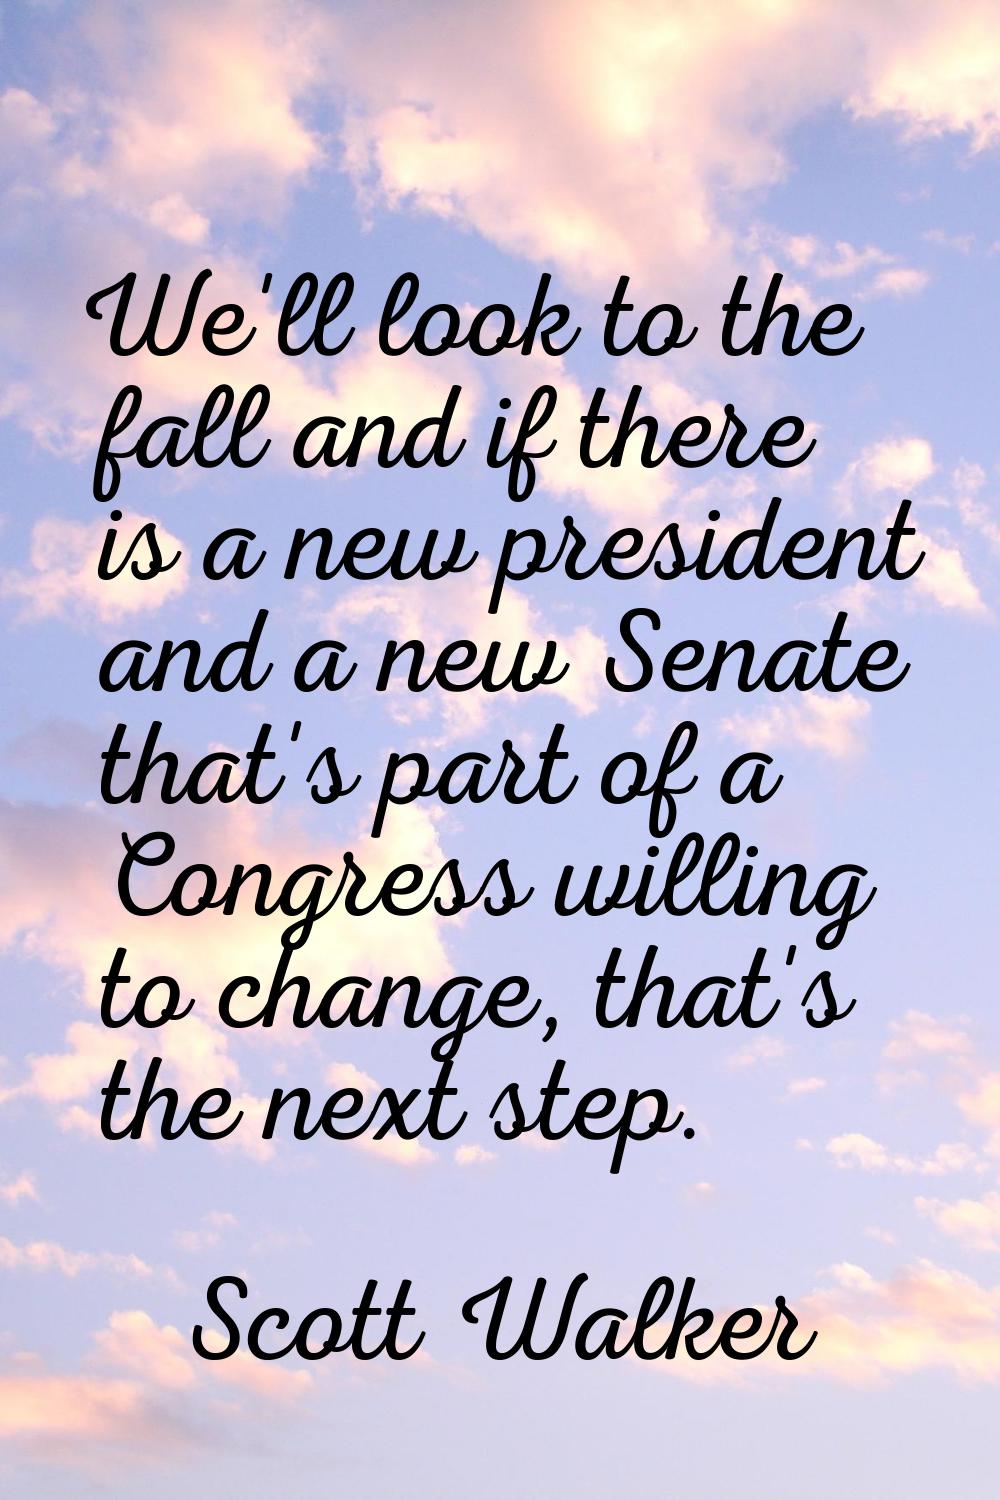 We'll look to the fall and if there is a new president and a new Senate that's part of a Congress w